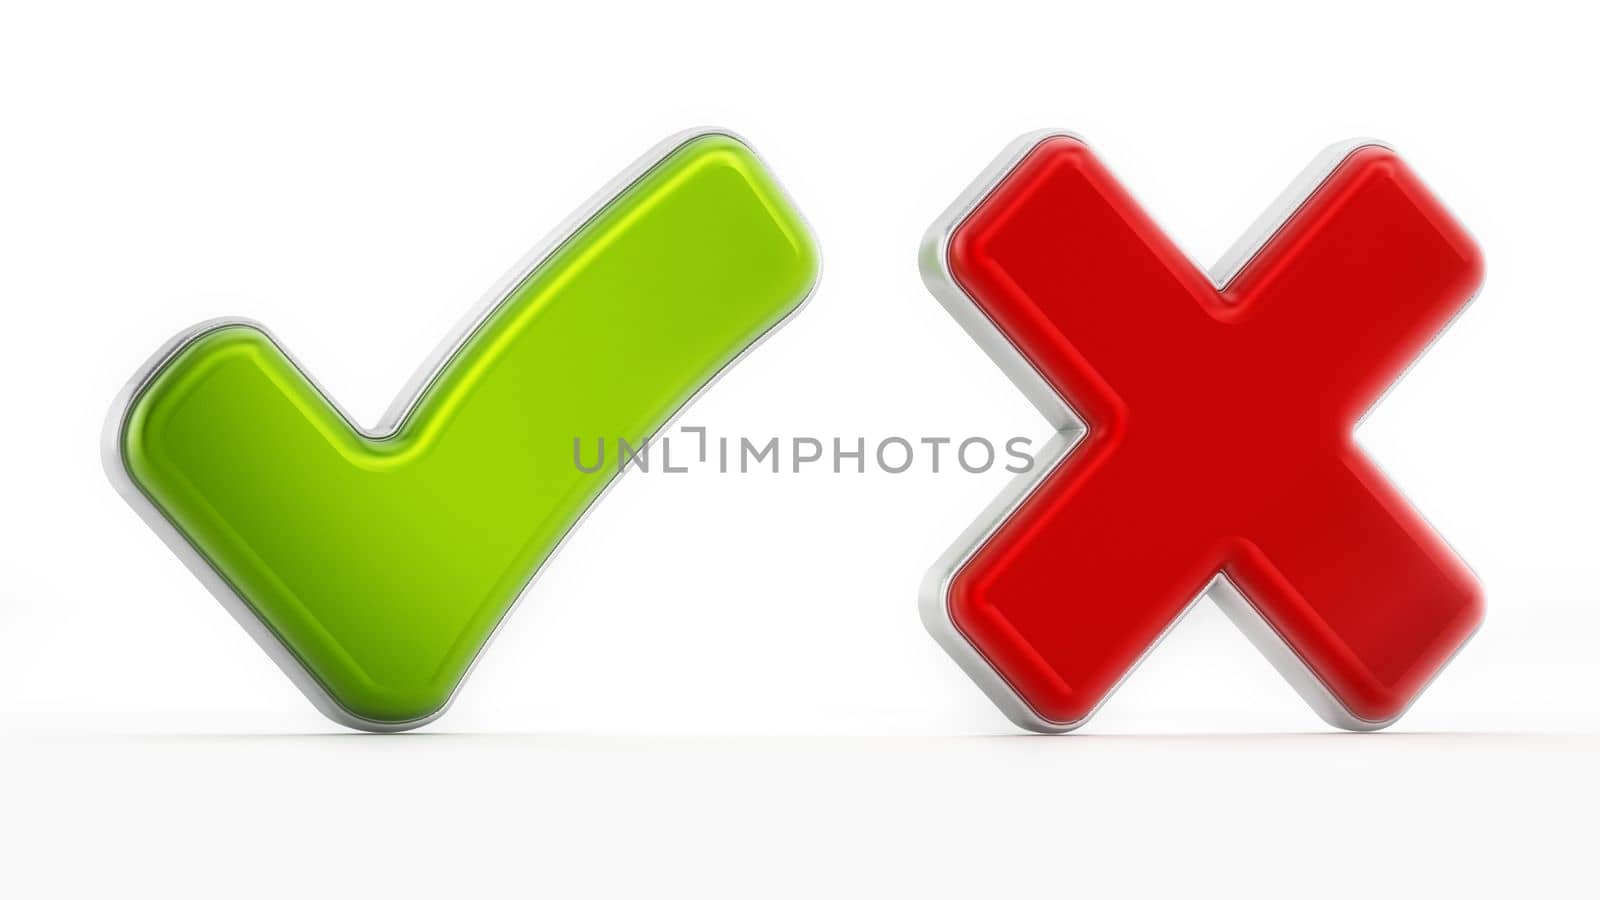 Tick and cross symbols isolated on white background. 3D illustration.